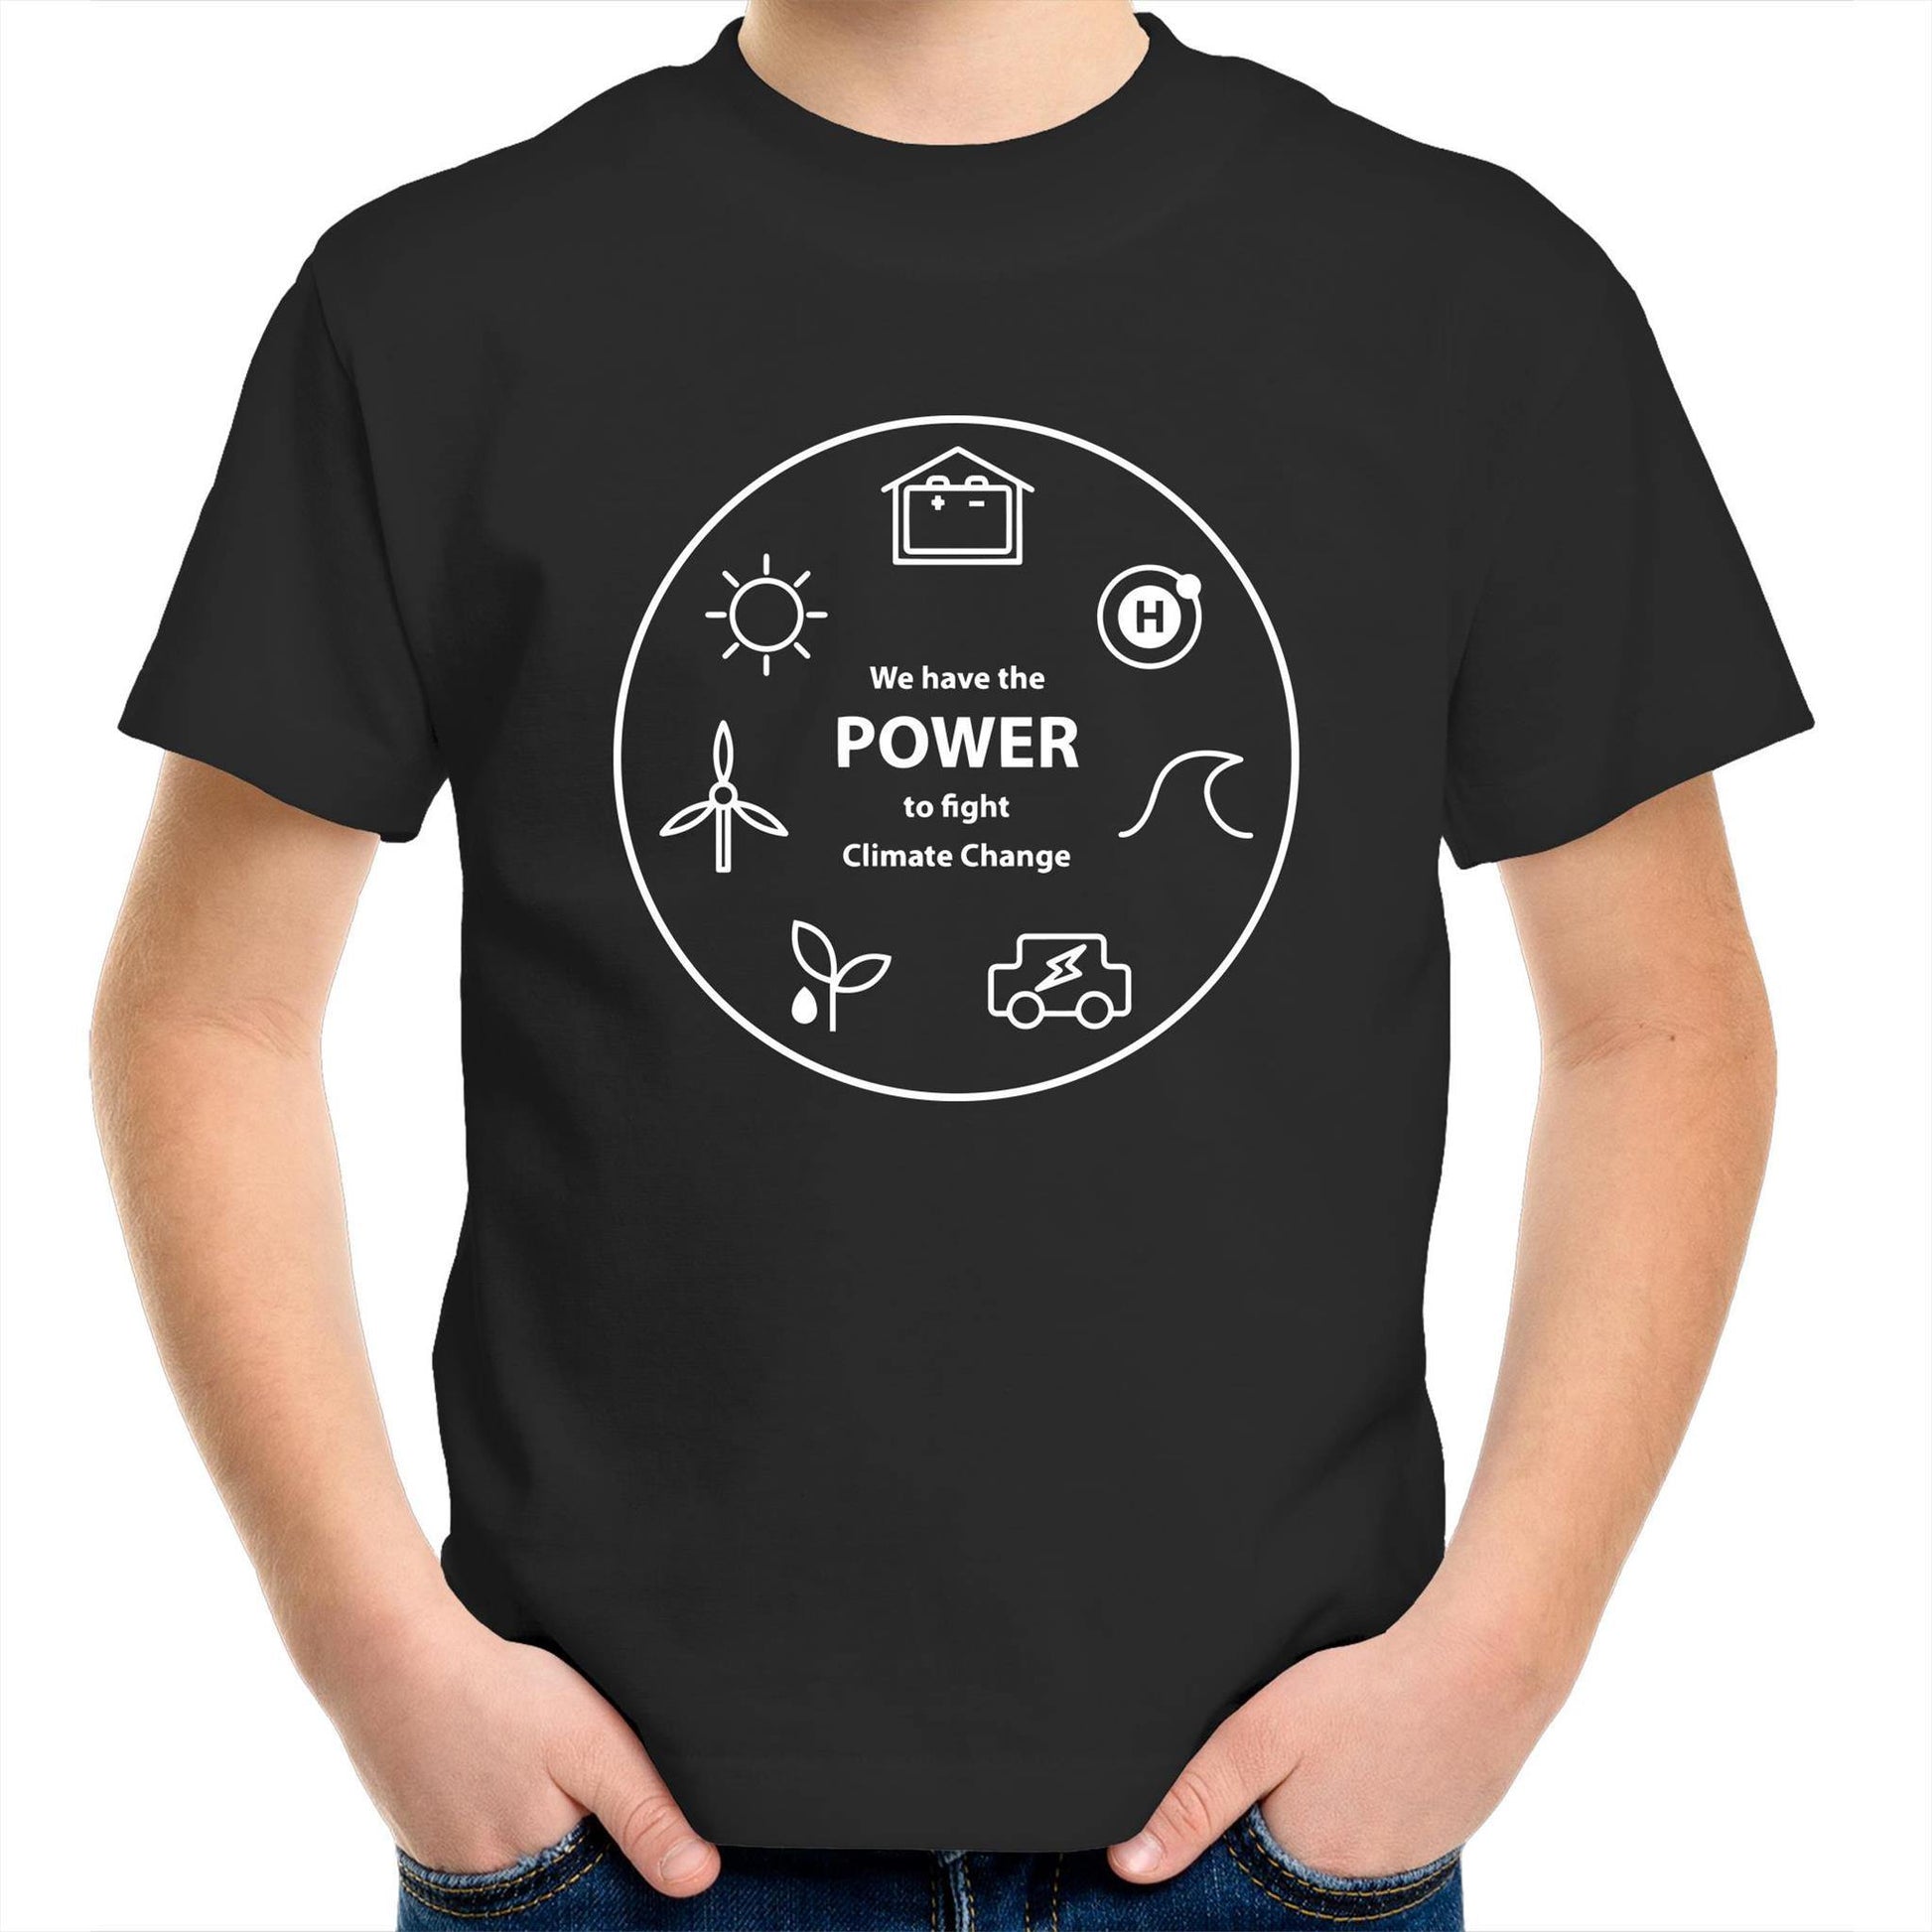 We Have The Power - Kids Youth Crew T-Shirt Black Kids Youth T-shirt Environment